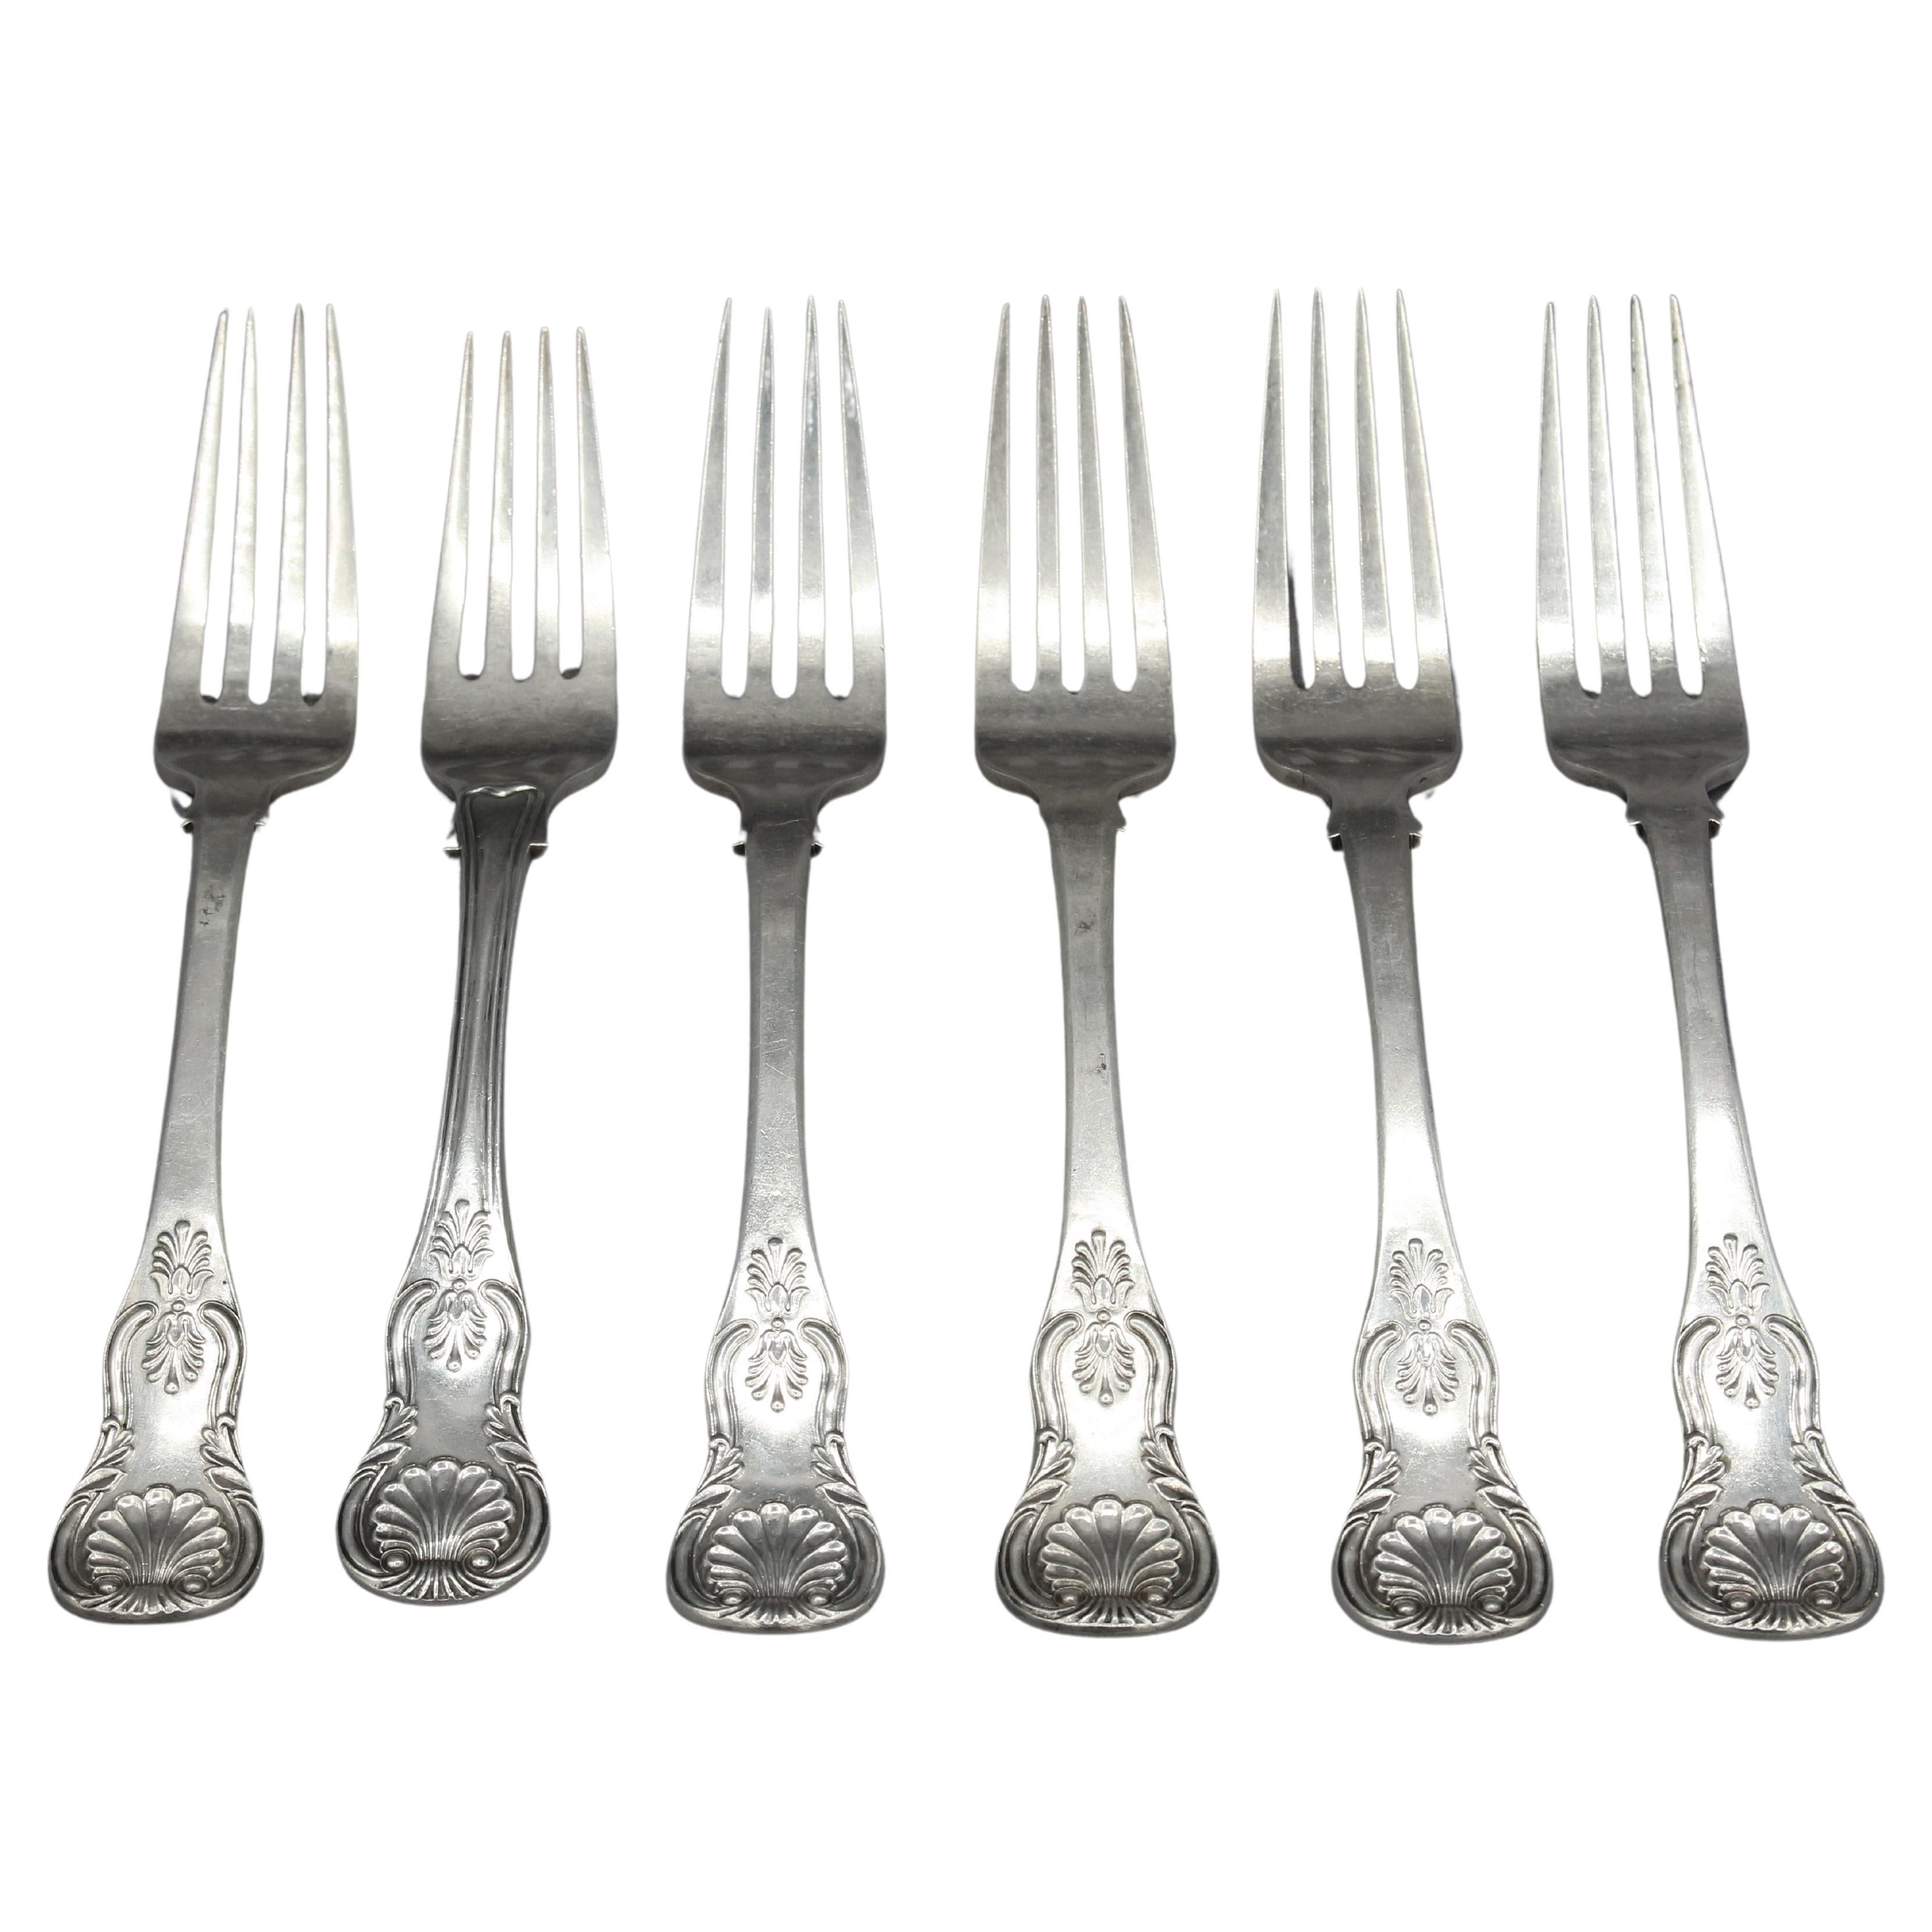 c. 1835 Set of 6 Coin Silver Dinner Forks by R. & W. Wilson For Sale